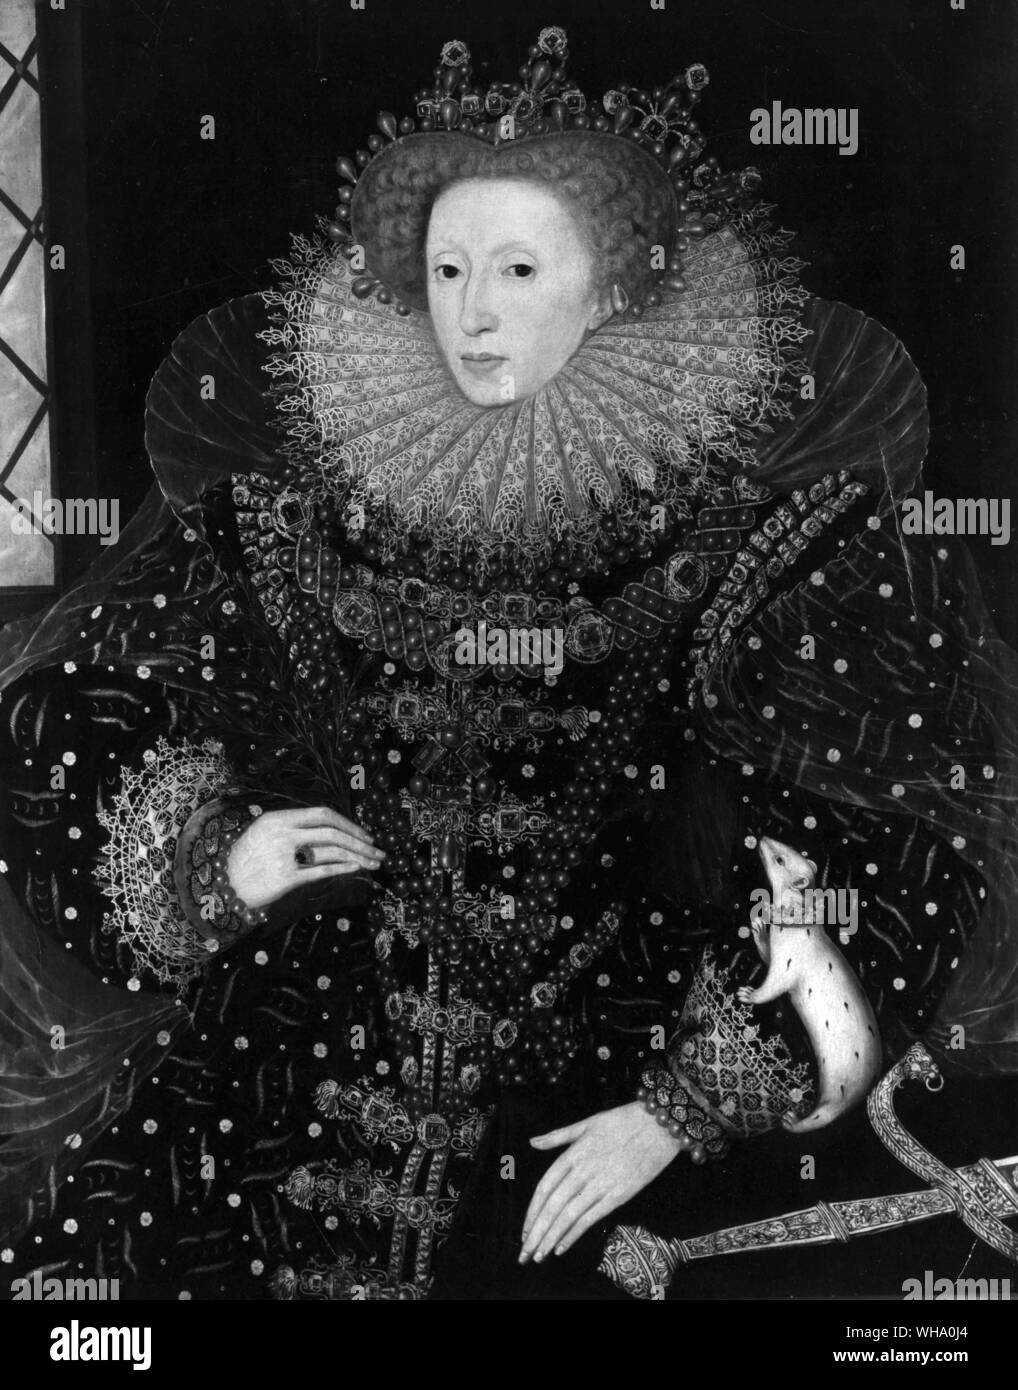 Queen Elizabeth I of England by N. Hilliard in Hatfield House. Stock Photo